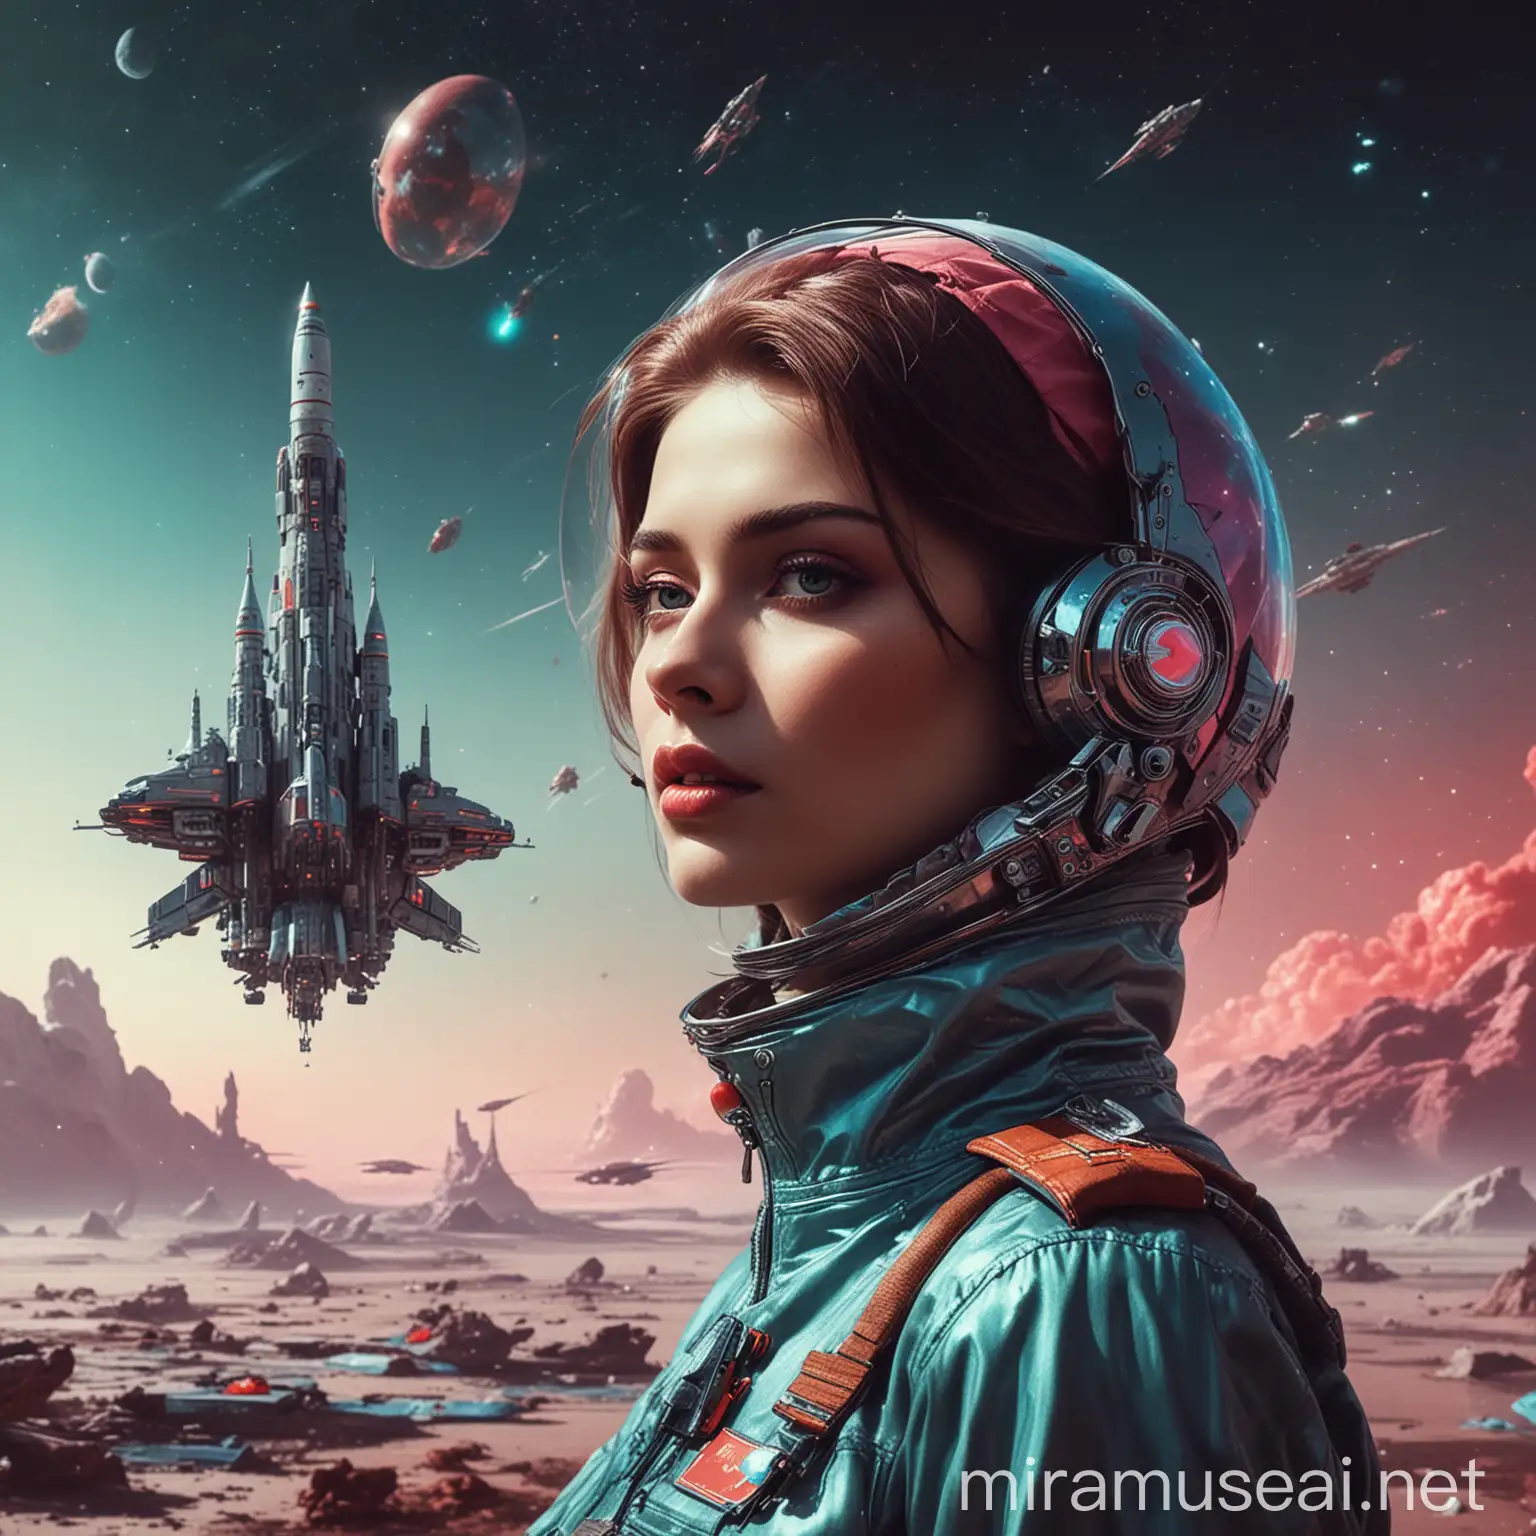 A soviet heroin on her dream odyssey, extremely colorful and ultra chromed, retro futuristic style, muted colors, spaceships 